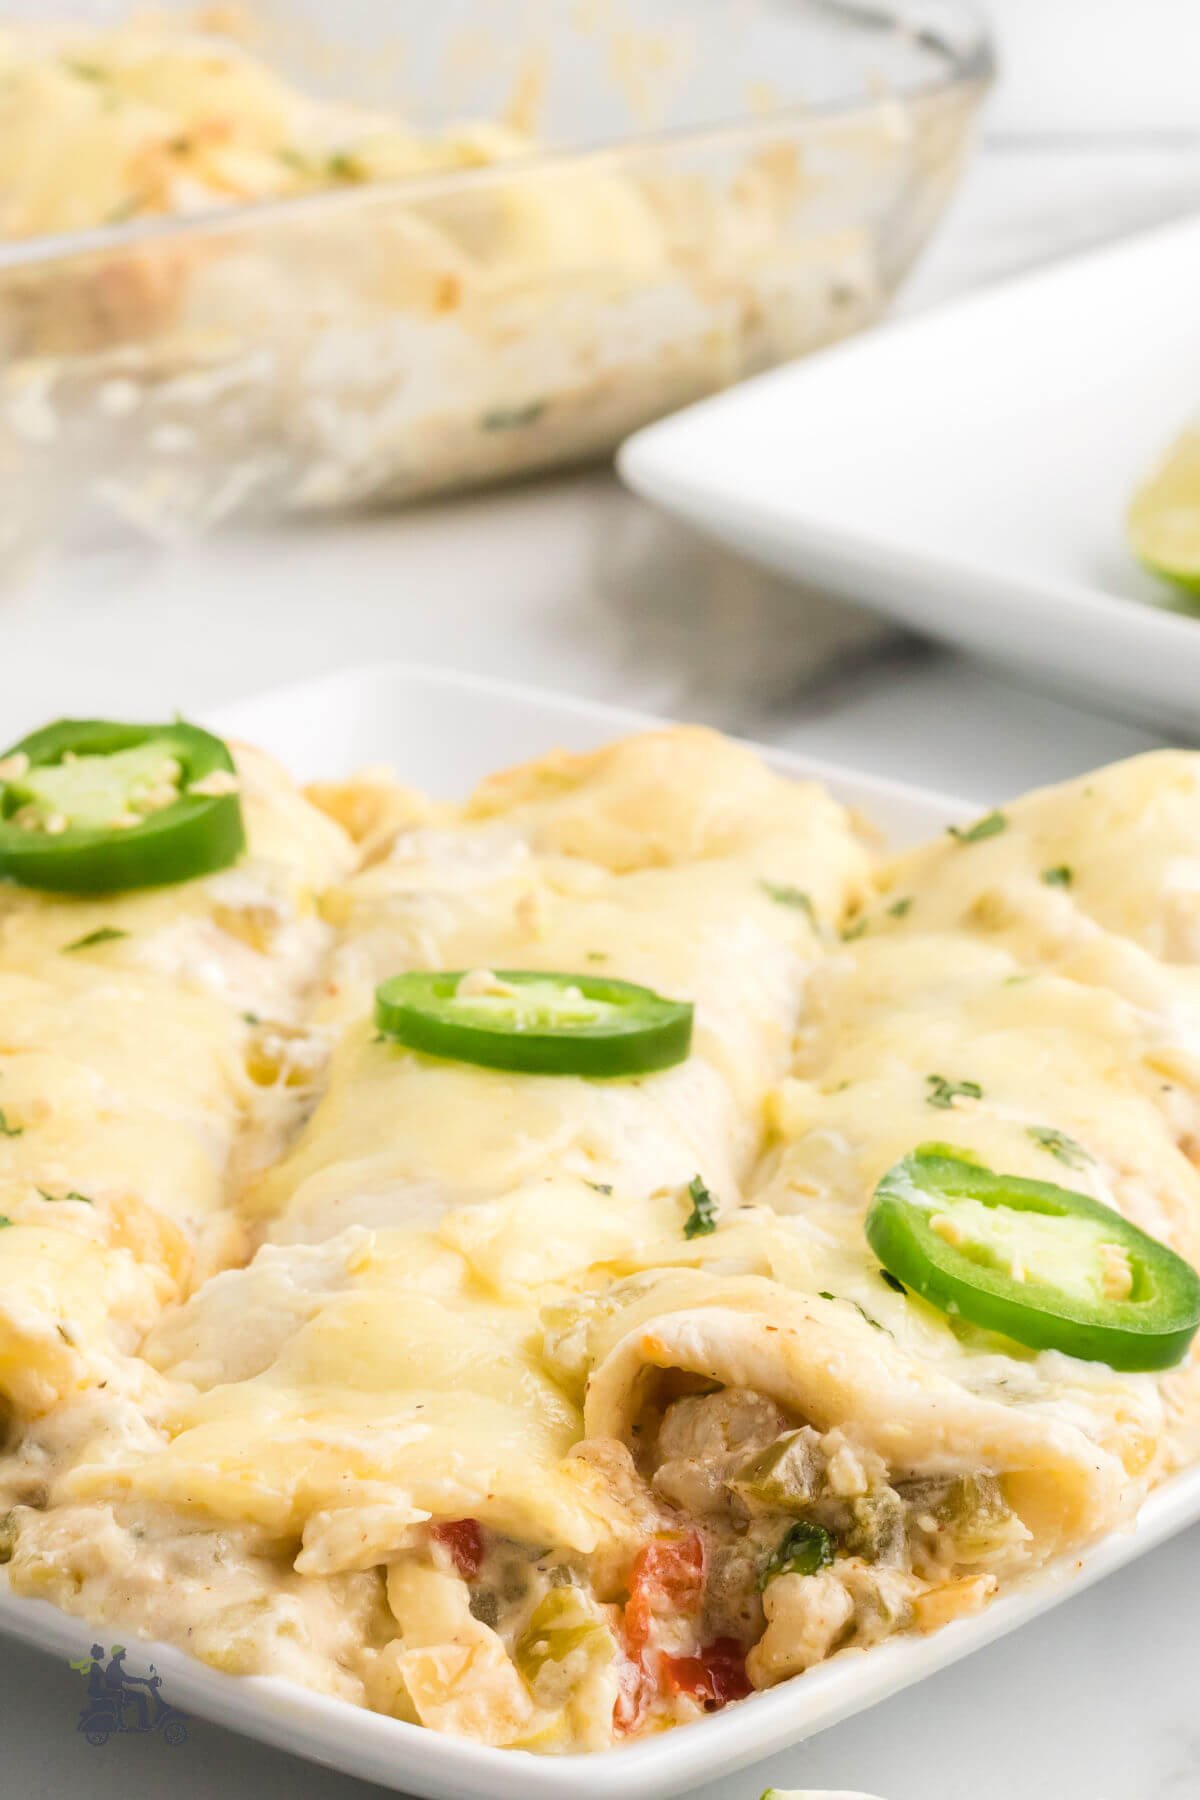 Mexican flavored shrimp enchiladas with a chili flavored white sauce. 